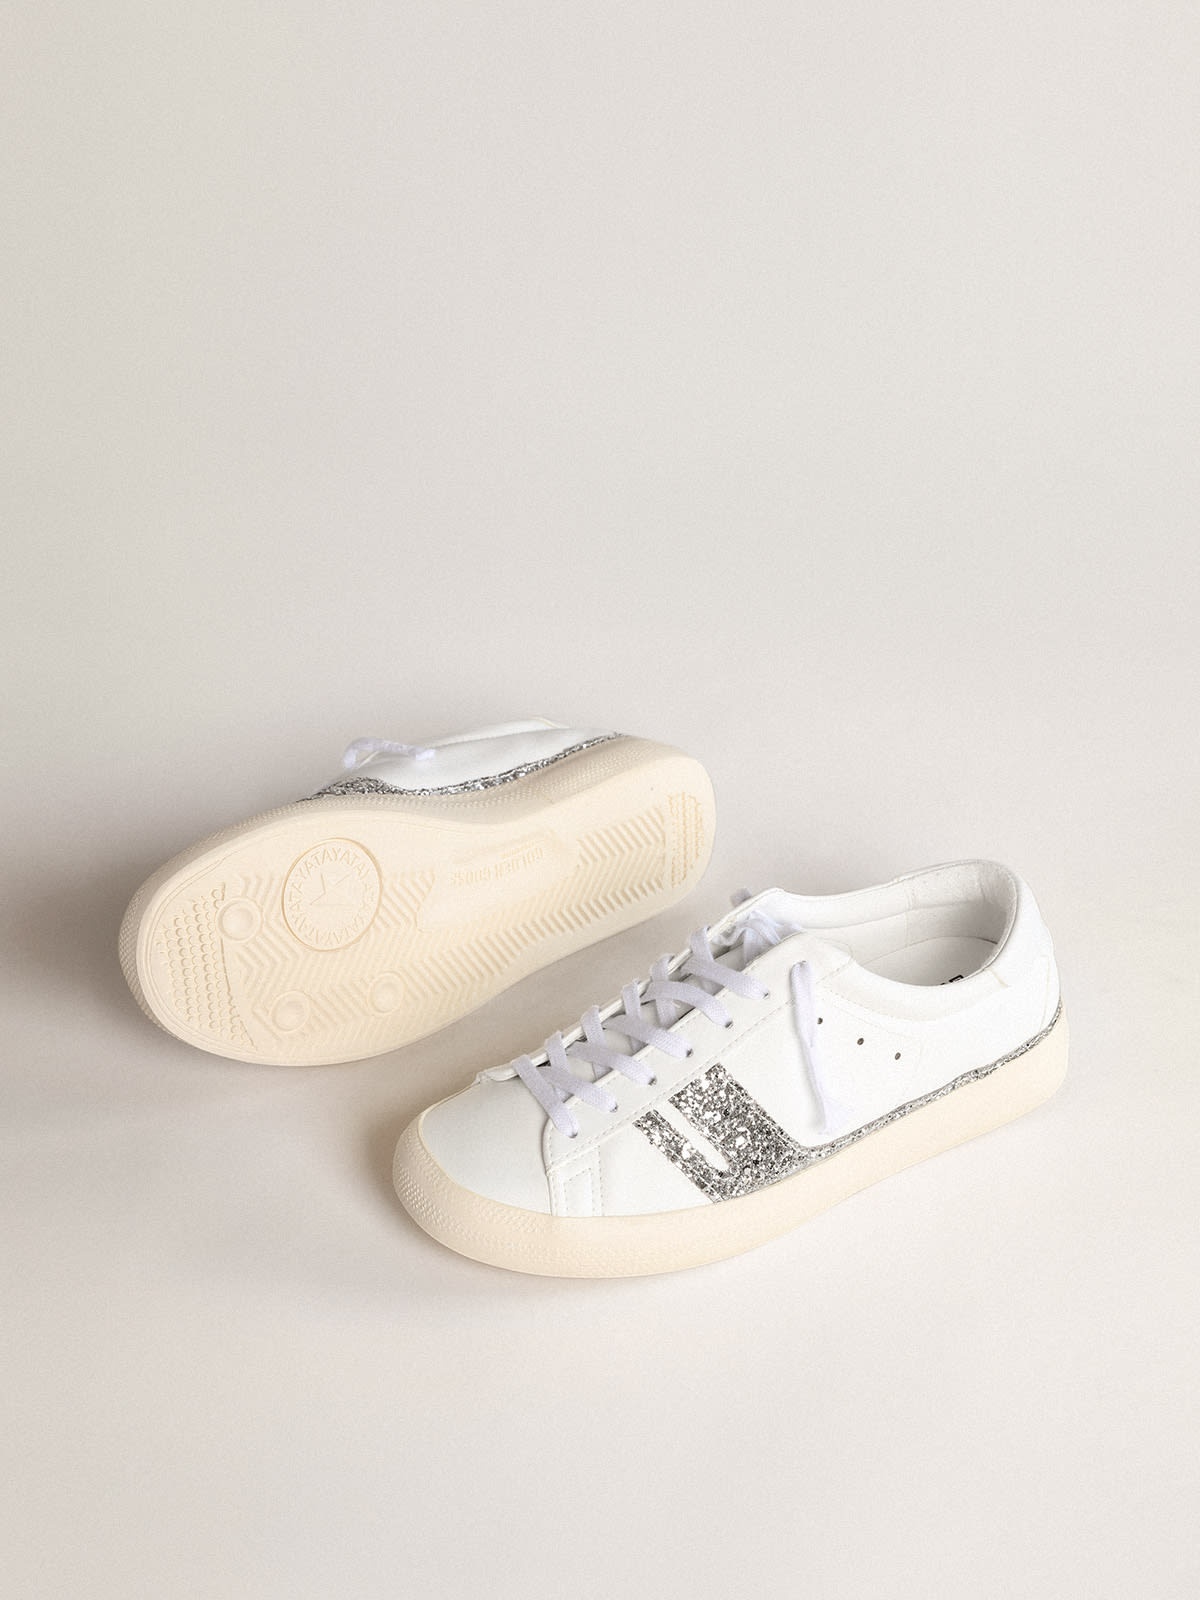 Yatay Model 1B sustainable sneakers with white bio-based upper and silver recycled glitter Y - 3